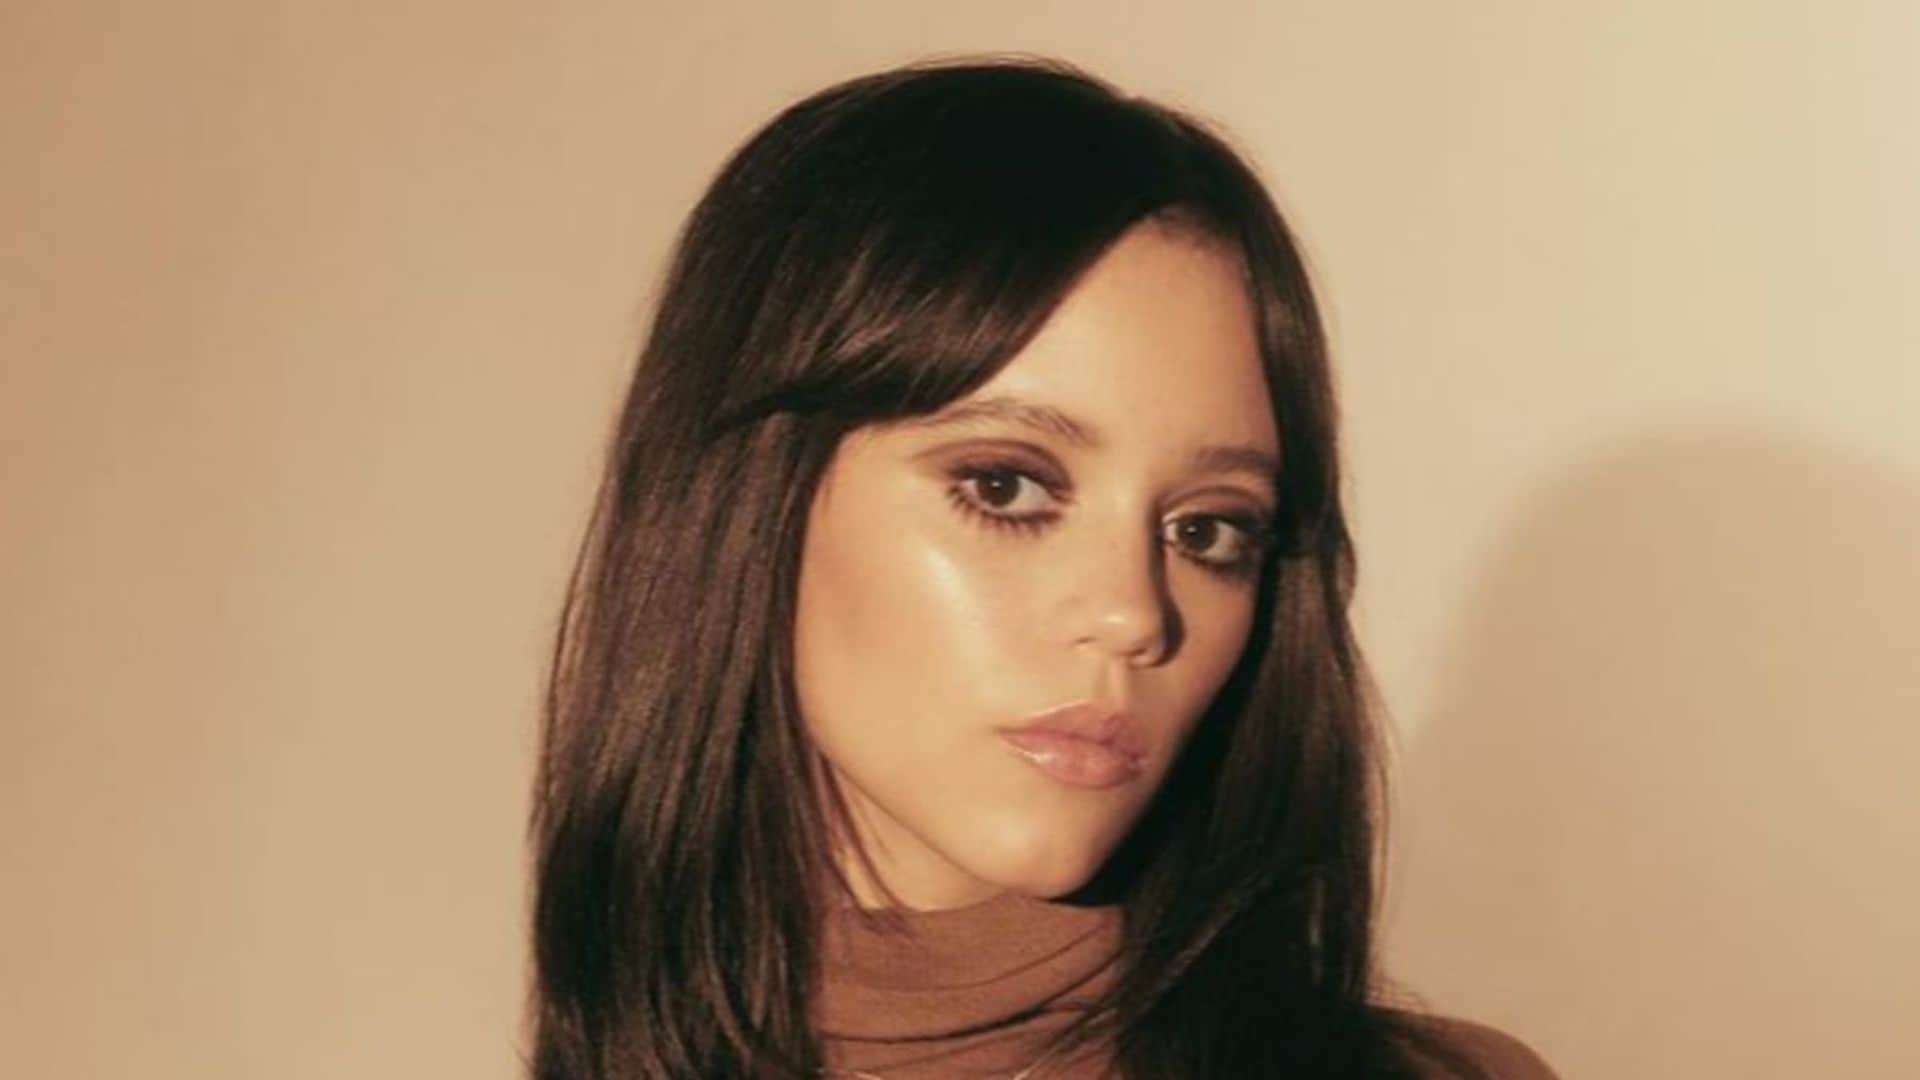 Jenna Ortega says playing Wednesday Addams is a challenge because she is not a typical teenager